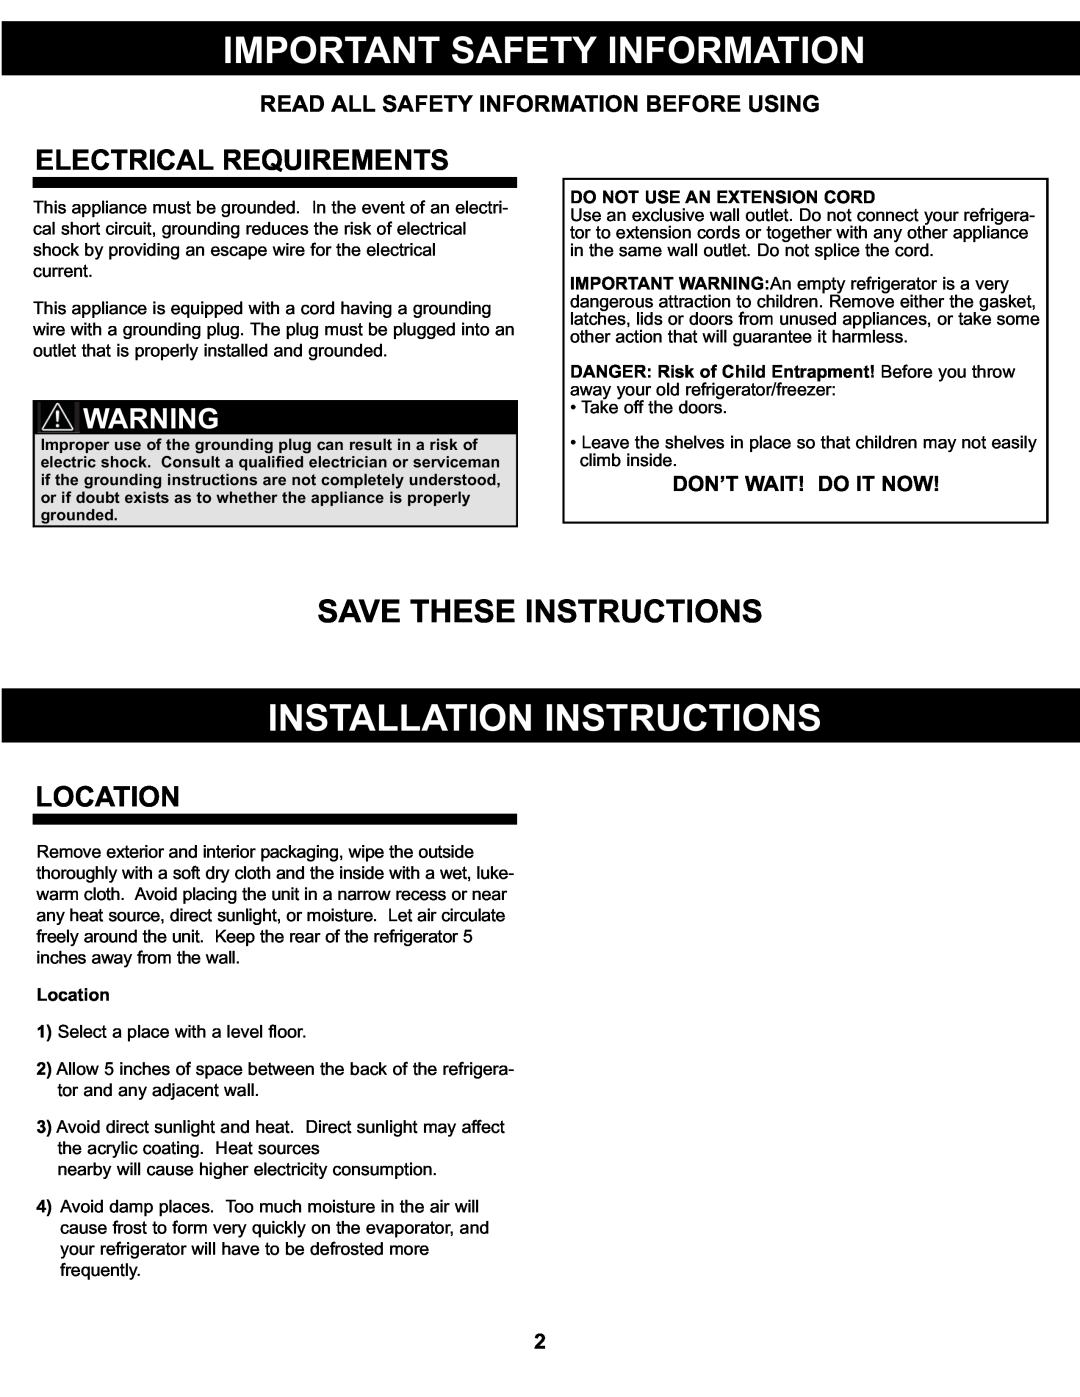 Danby DCR122BLDD Important Safety Information, Installation Instructions, Save These Instructions, Electrical Requirements 